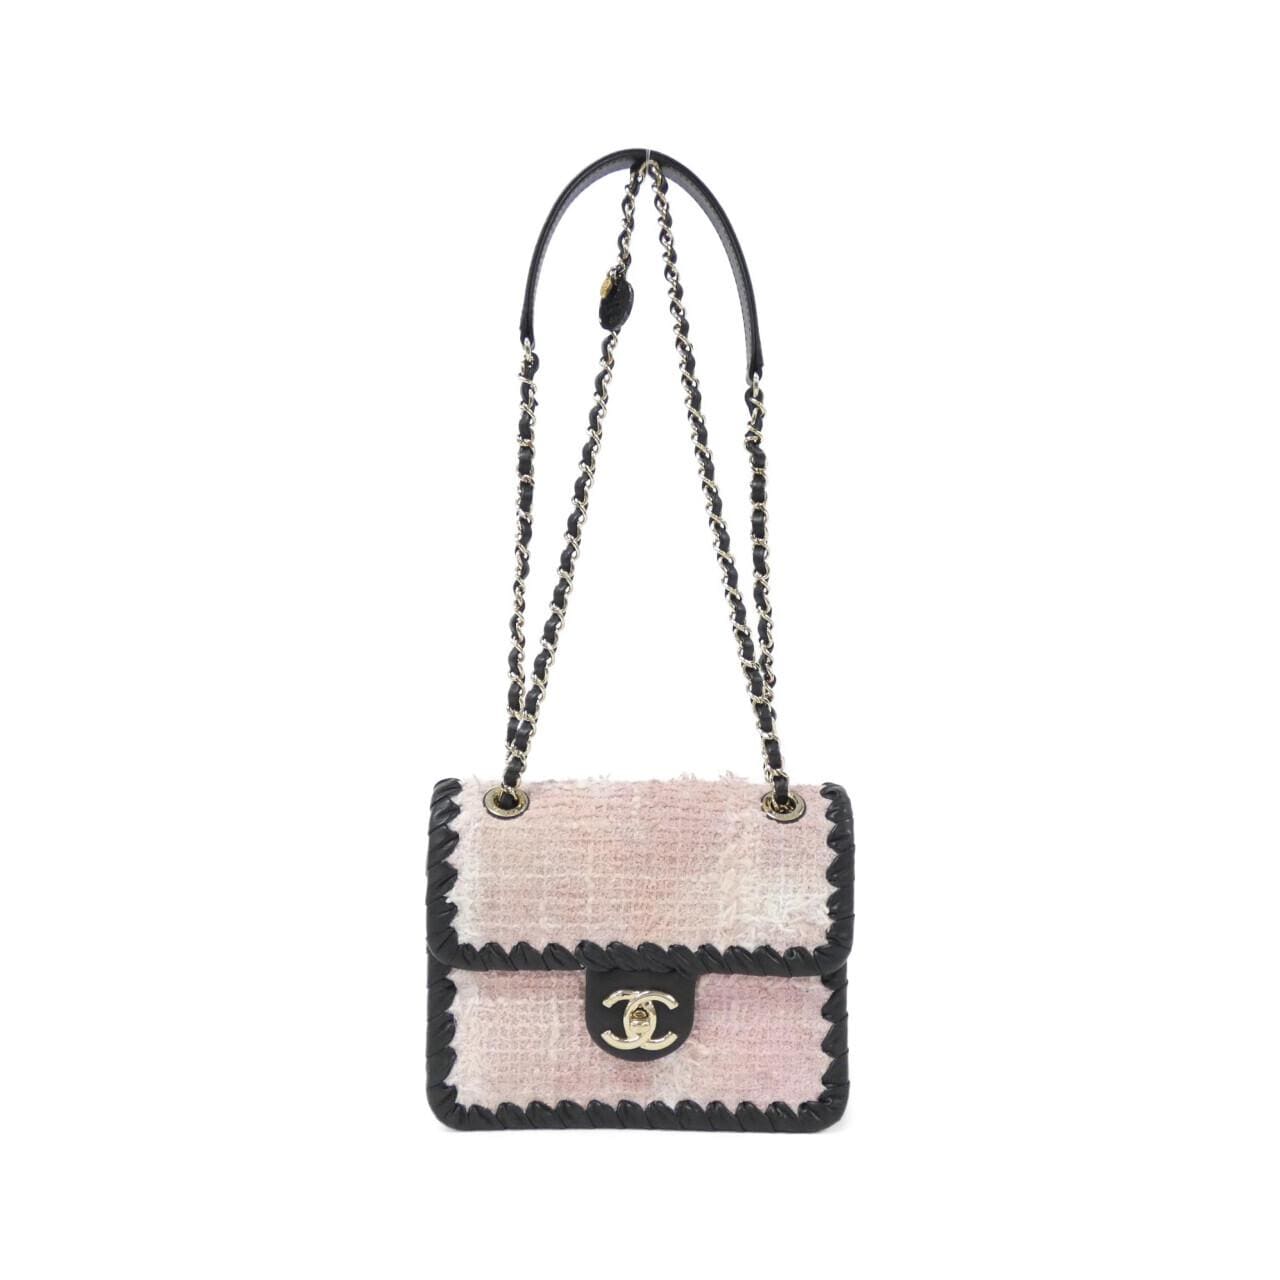 CHANEL AS2495 肩背包